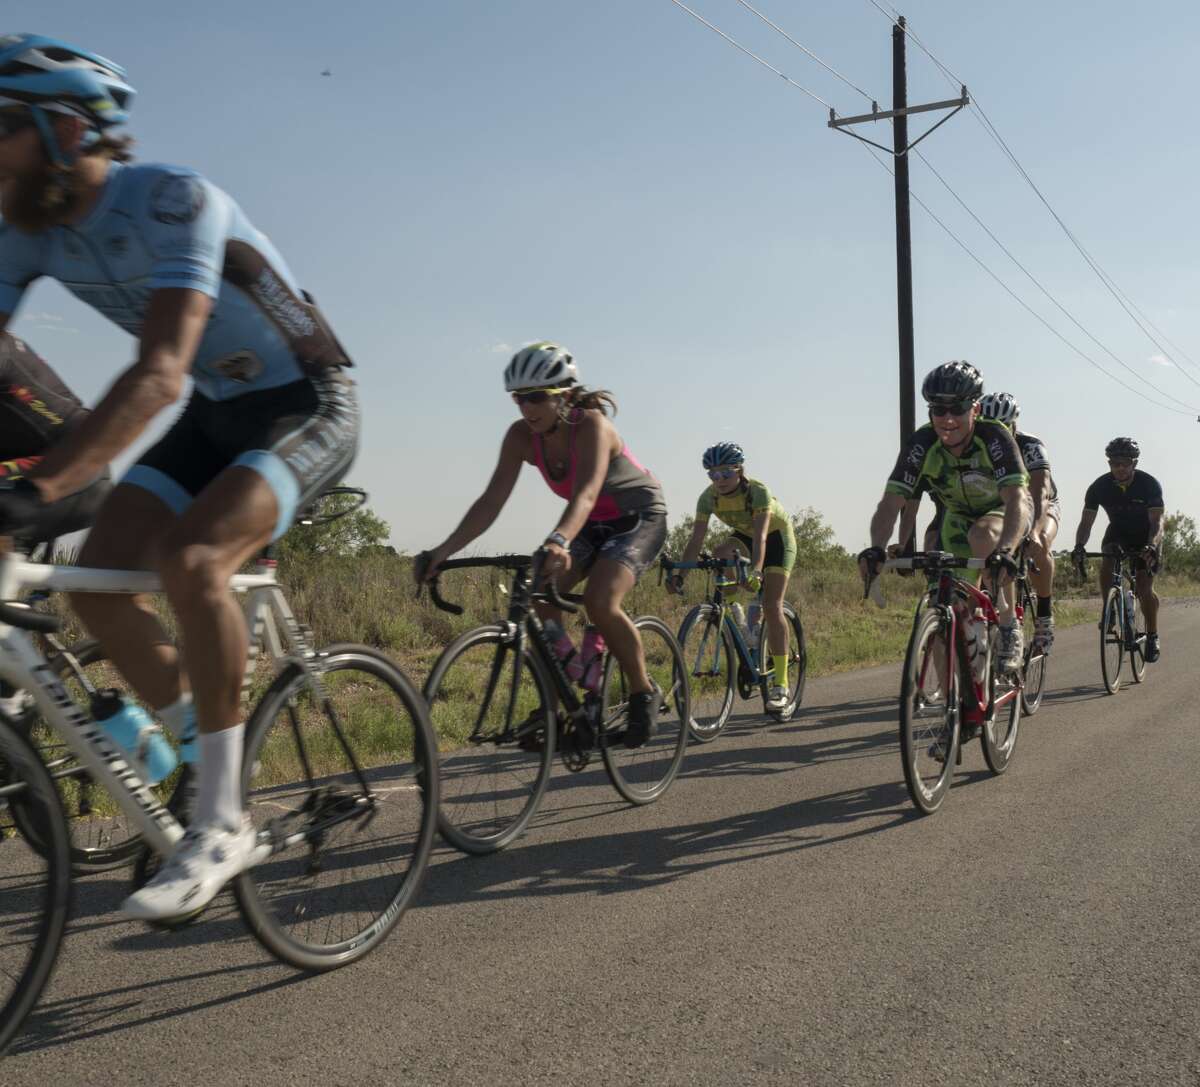 Members of the Permian Basin Bicycle Association make their way along county road south of Midland in June. A two-year study shows that beginning an exercise routine before age 65 can reduce chance of heart failure.